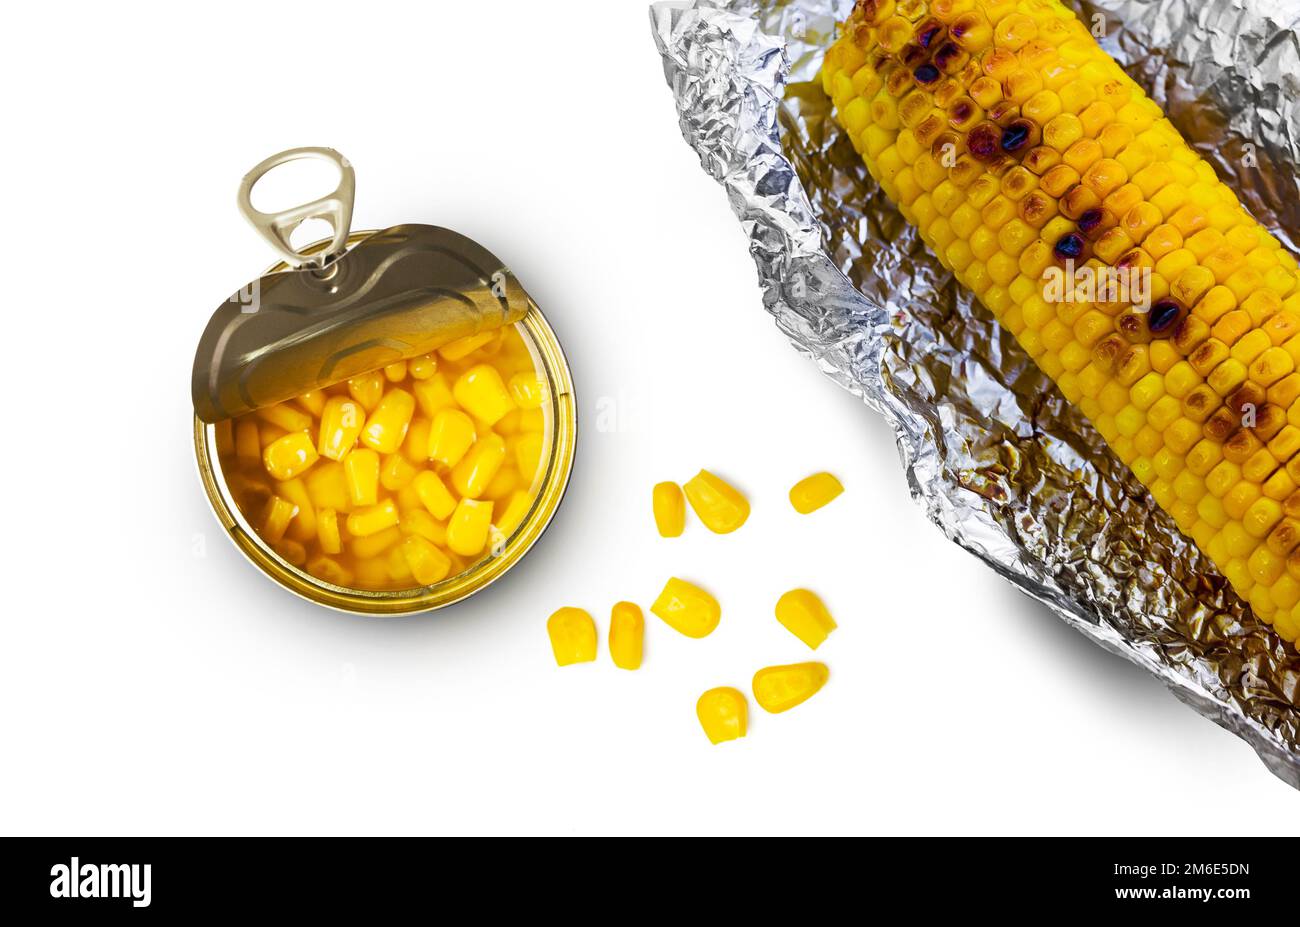 Sweet corn in a tin can and grilled corn in aluminum foil on a white background Stock Photo